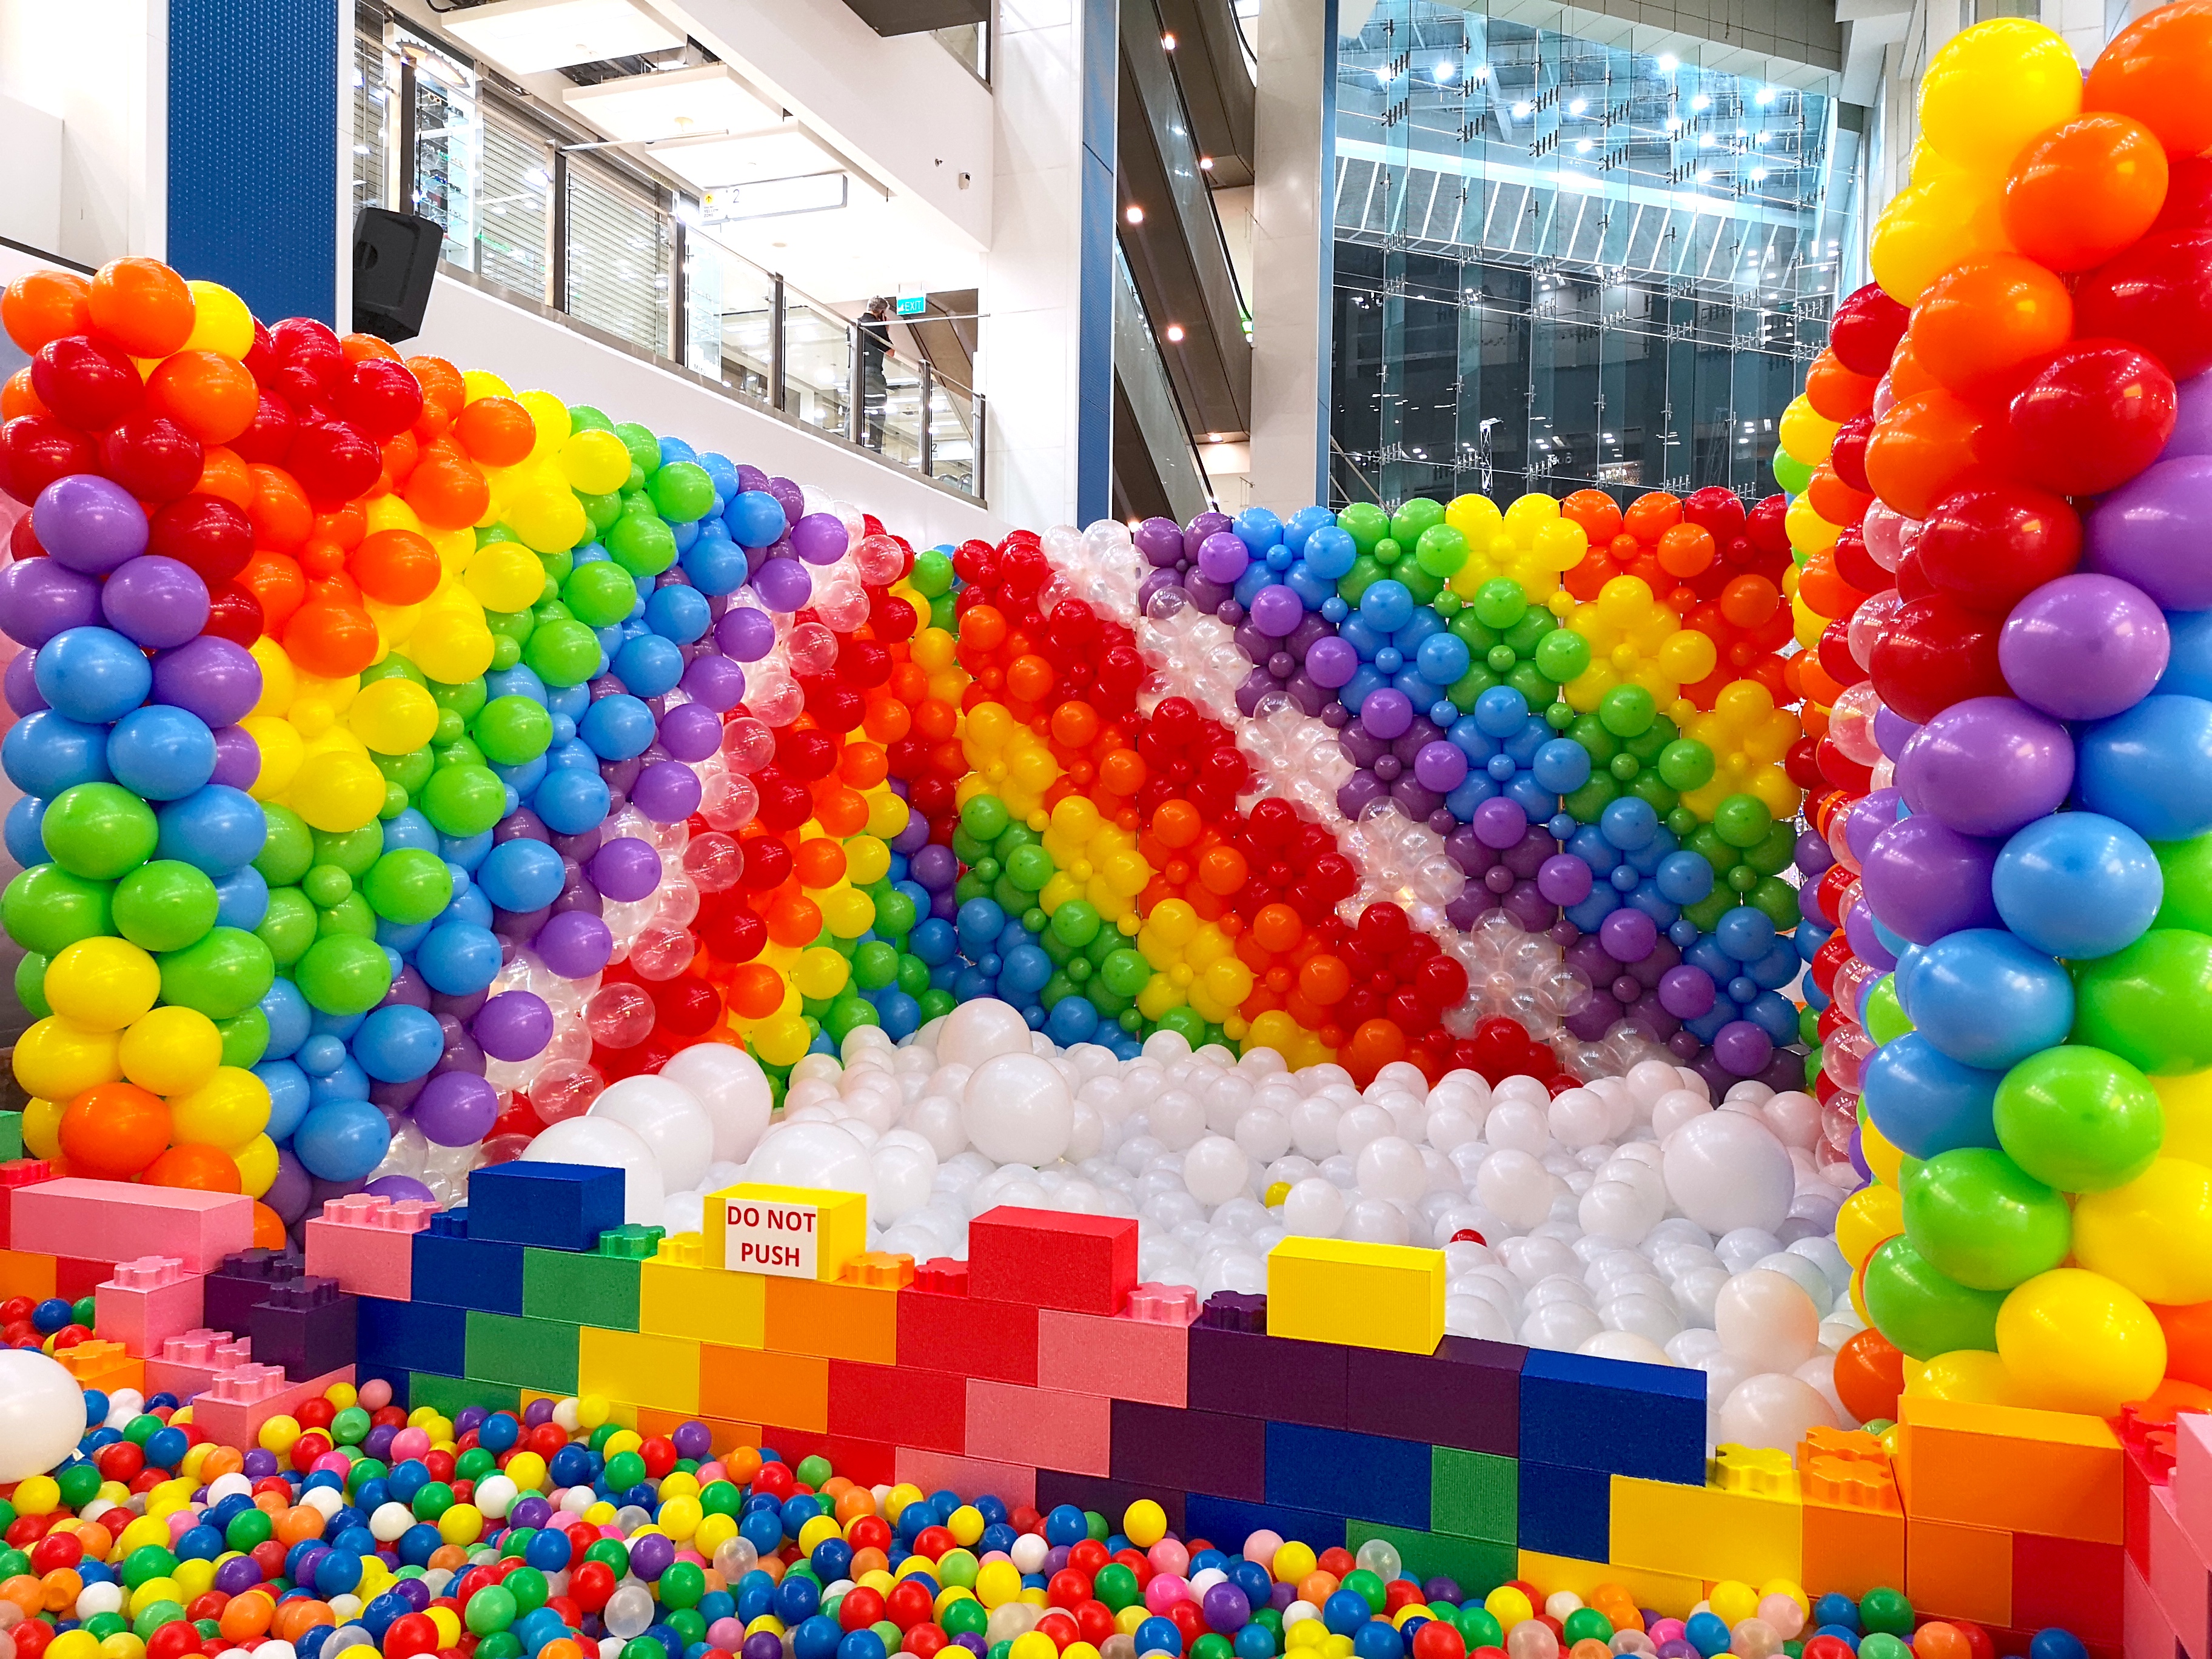 Balloon Pit in Singapore